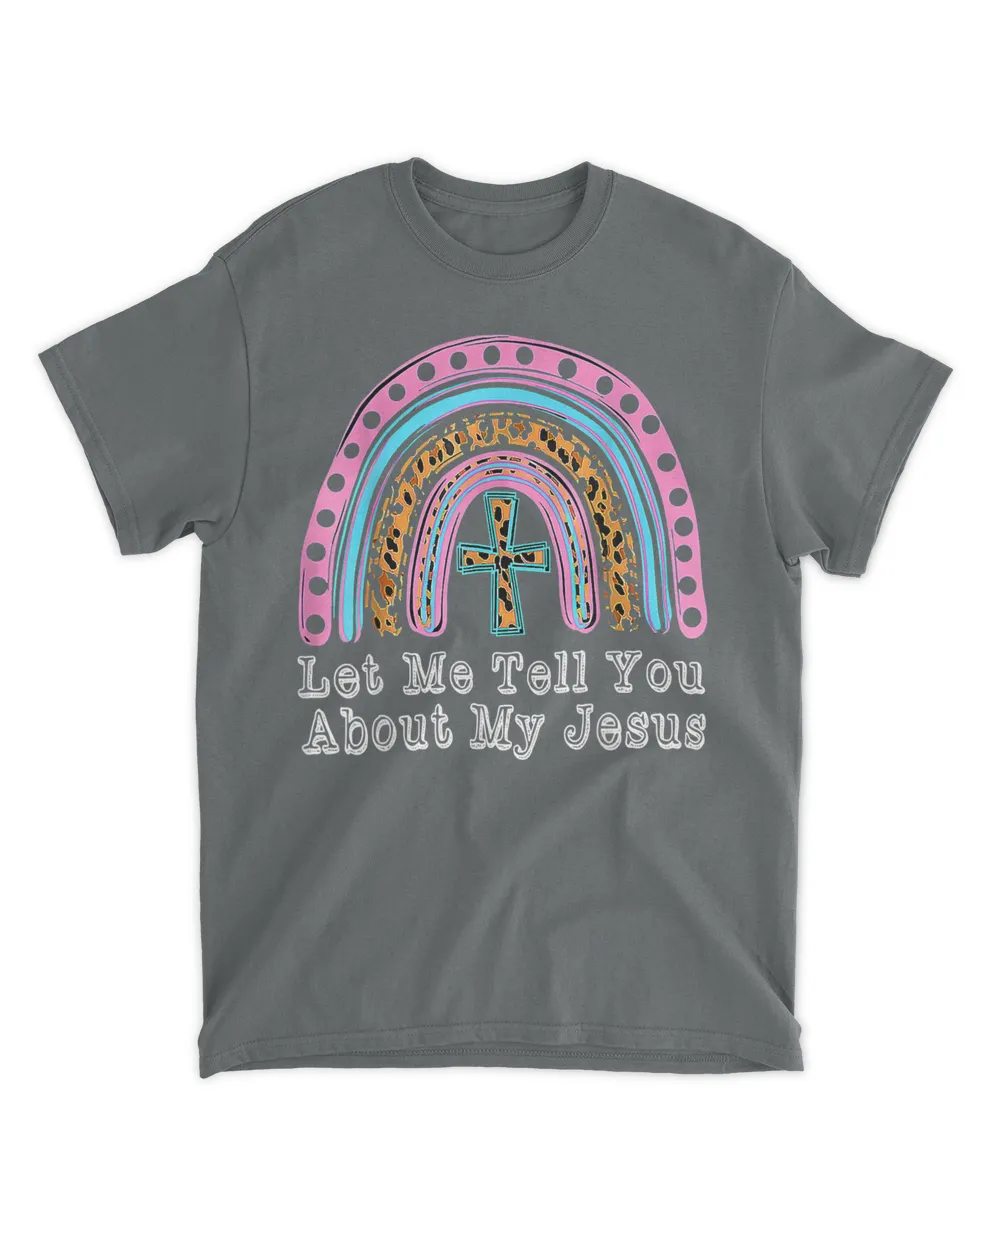 got-mcw-279 Let Me Tell You About My Jesus